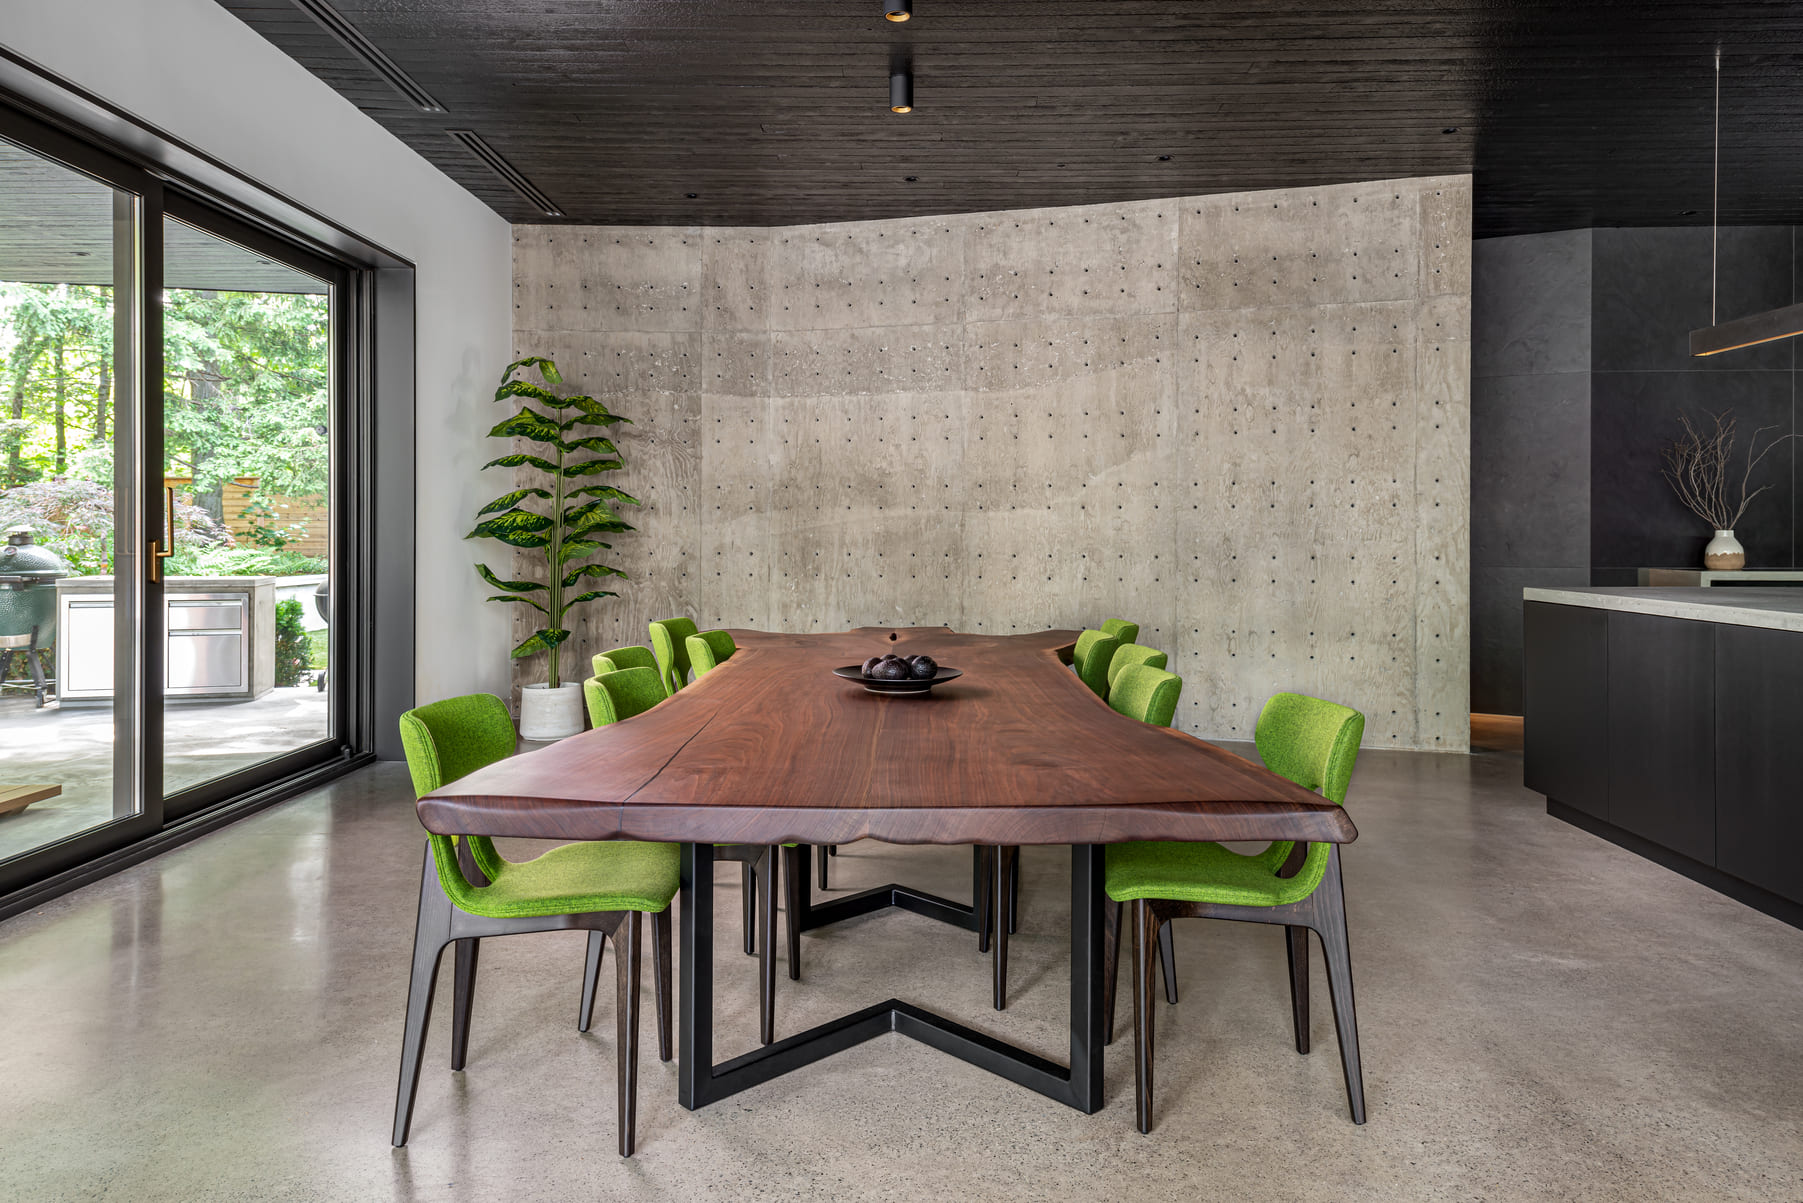 Contemporary custom home design featuring concrte slabs and a wood grain kitchen table.